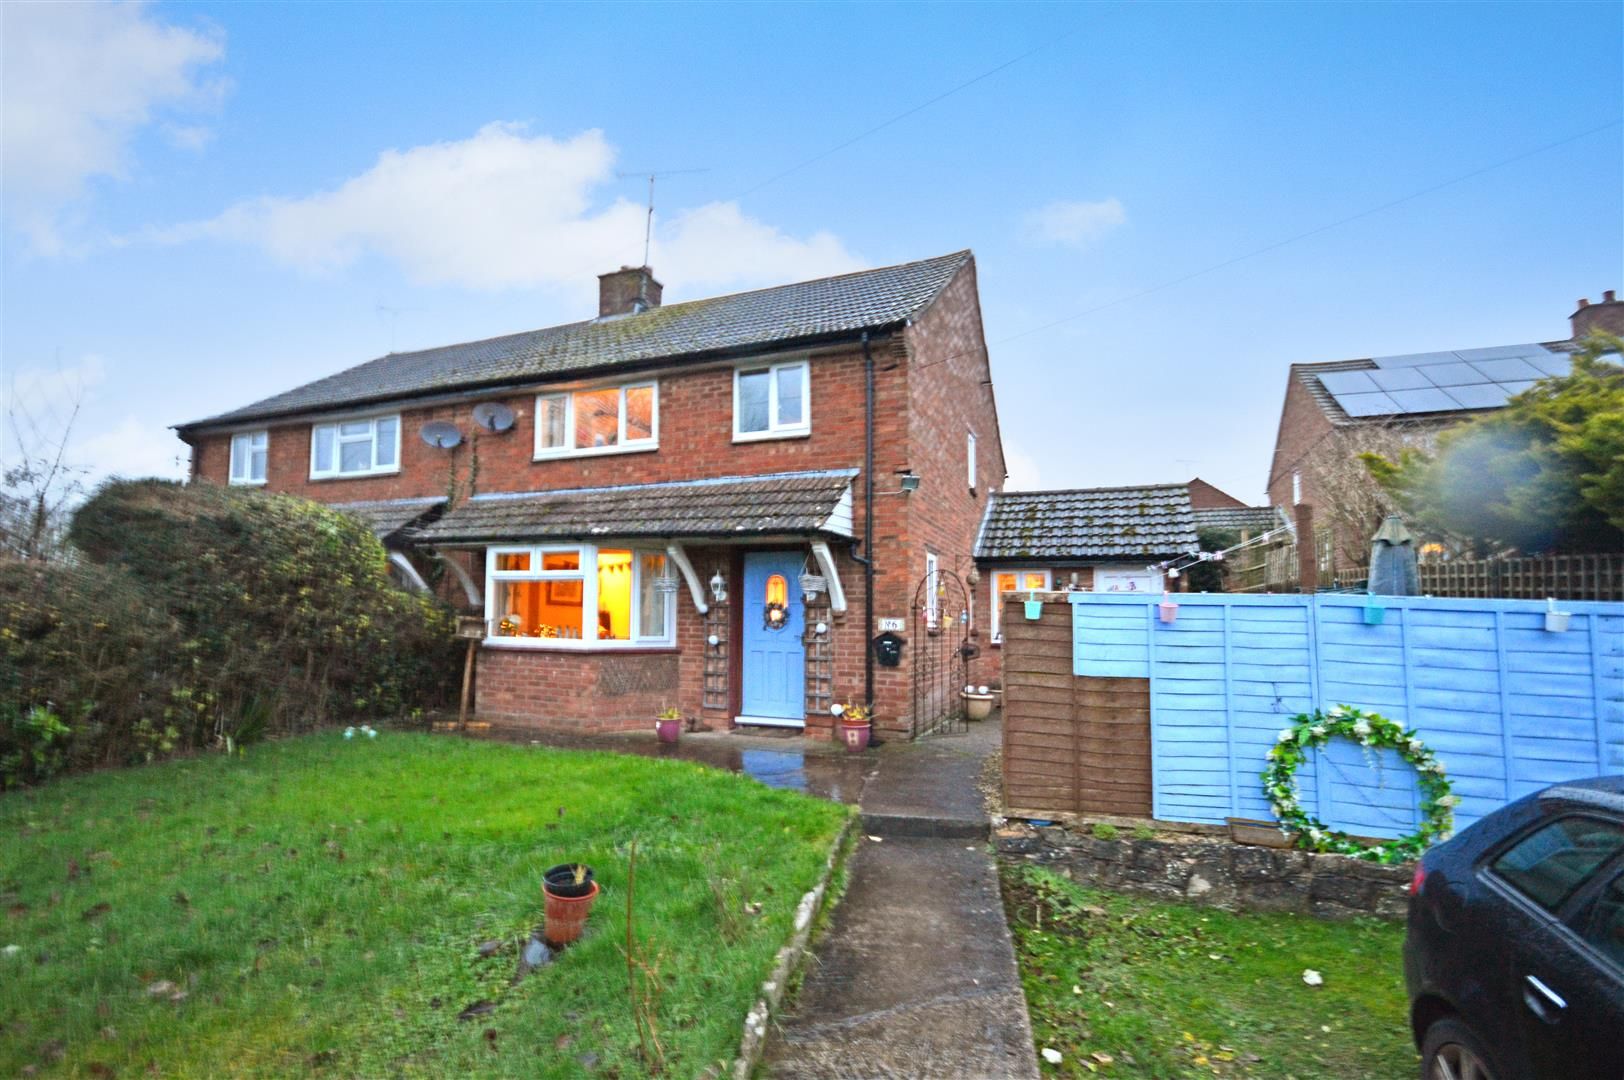 3 bed semi-detached for sale in Much Birch - Property Image 1